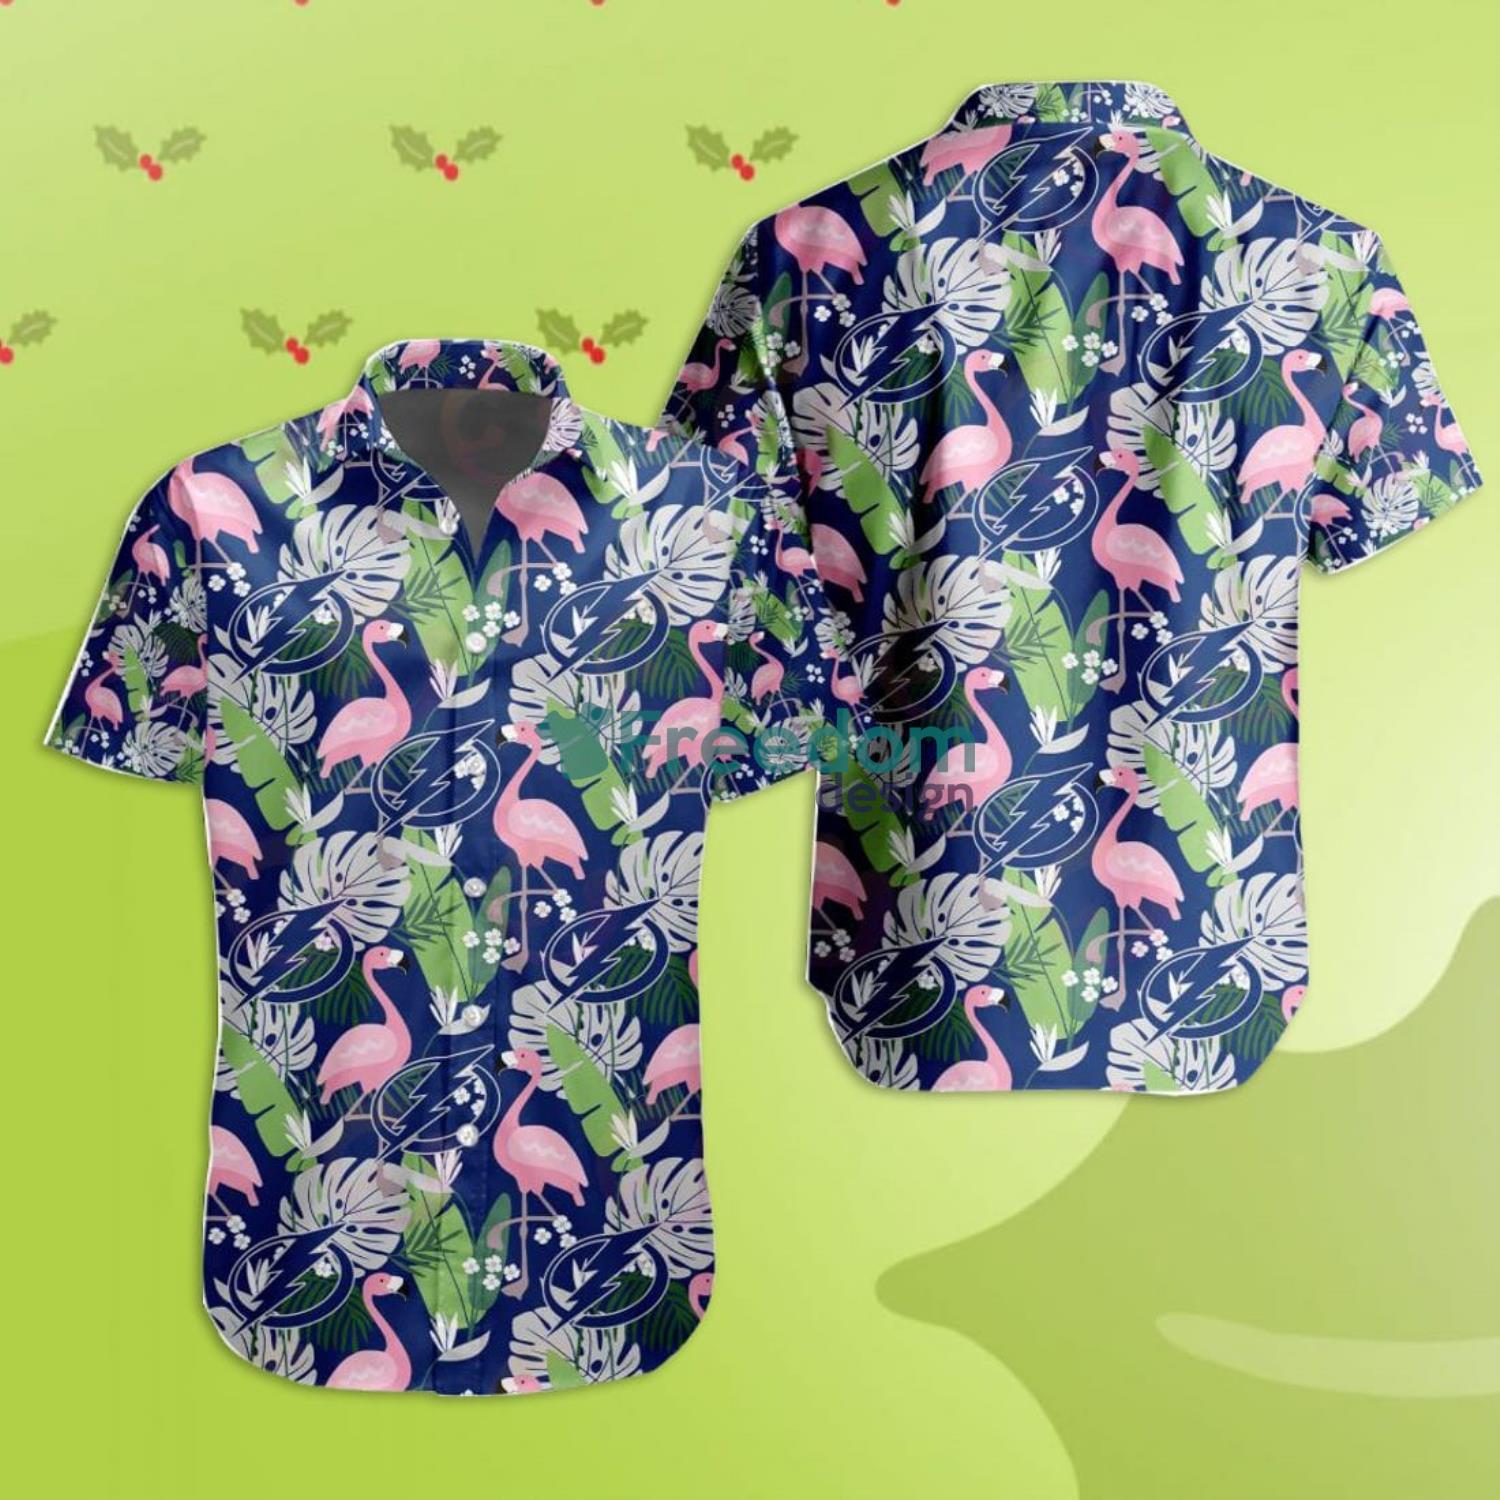 St. Louis Blues NHL Flower Hawaiian Shirt Great Gift For Fans -  Freedomdesign